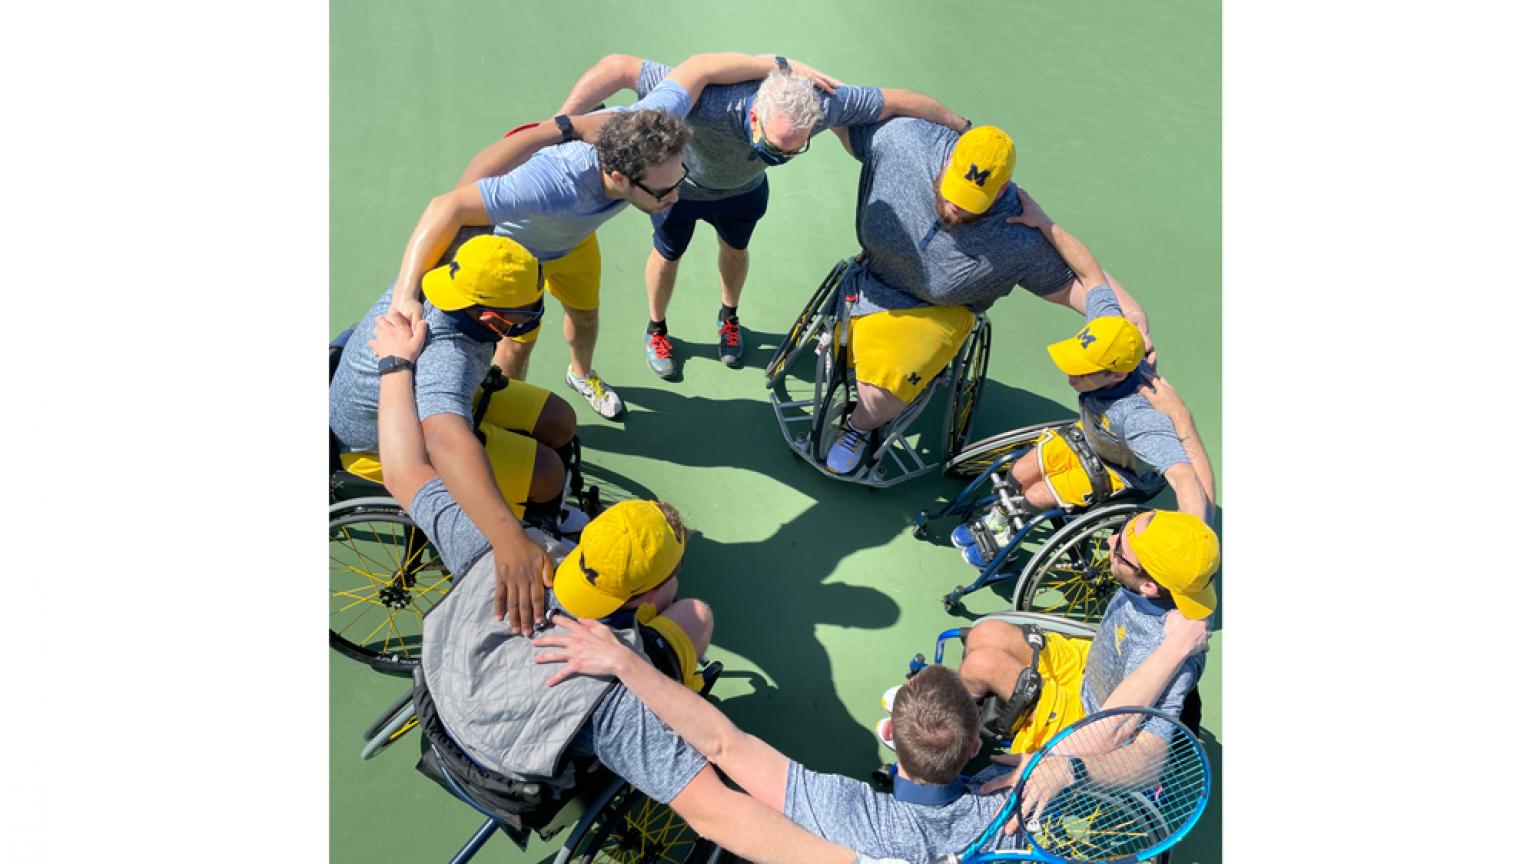 The tennis team huddles prior to their matches. 